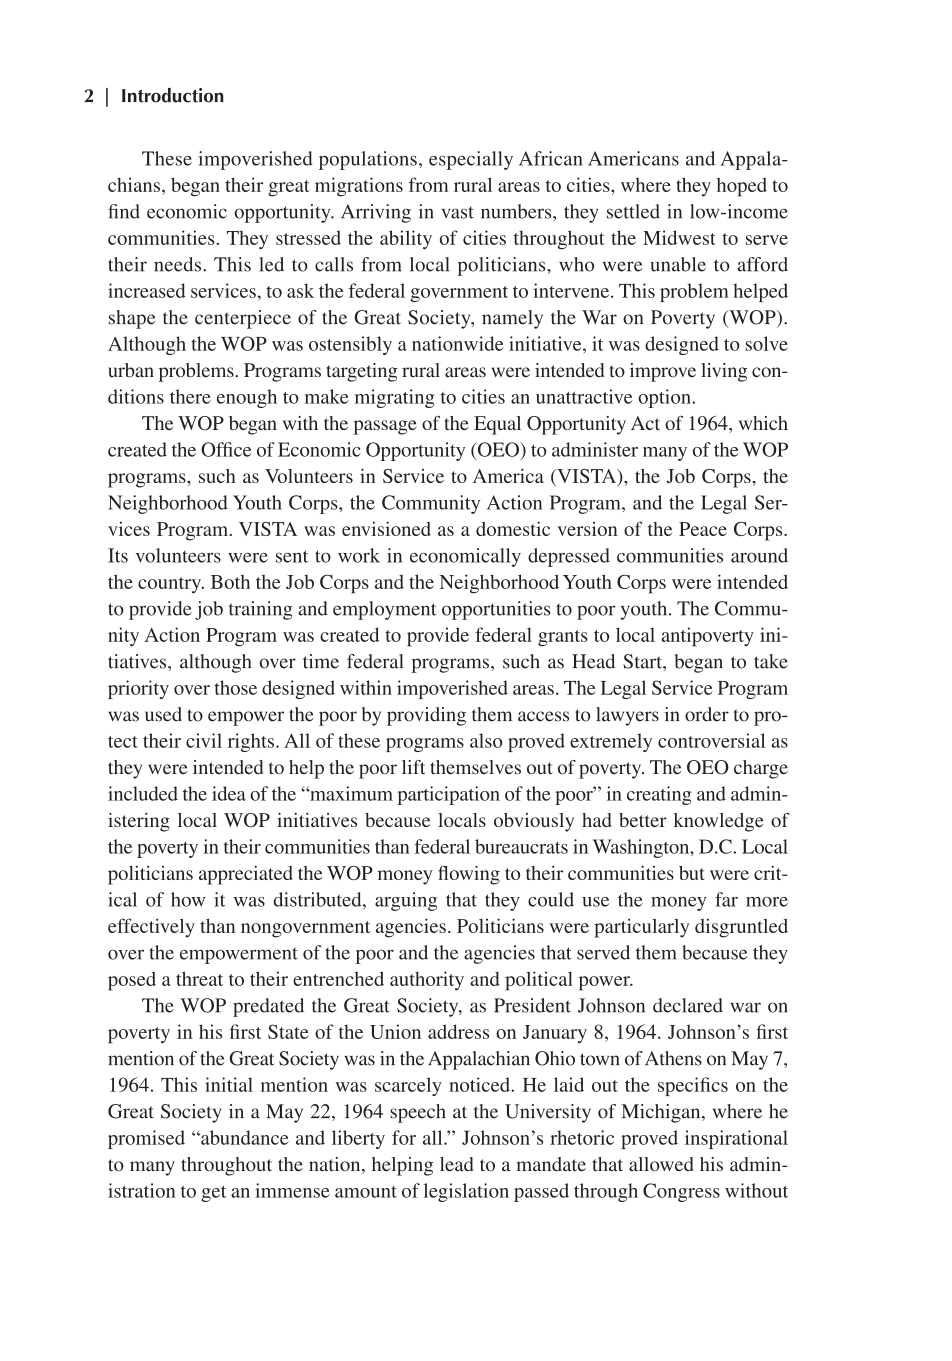 The Great Society and the War on Poverty: An Economic Legacy in Essays and Documents page 2